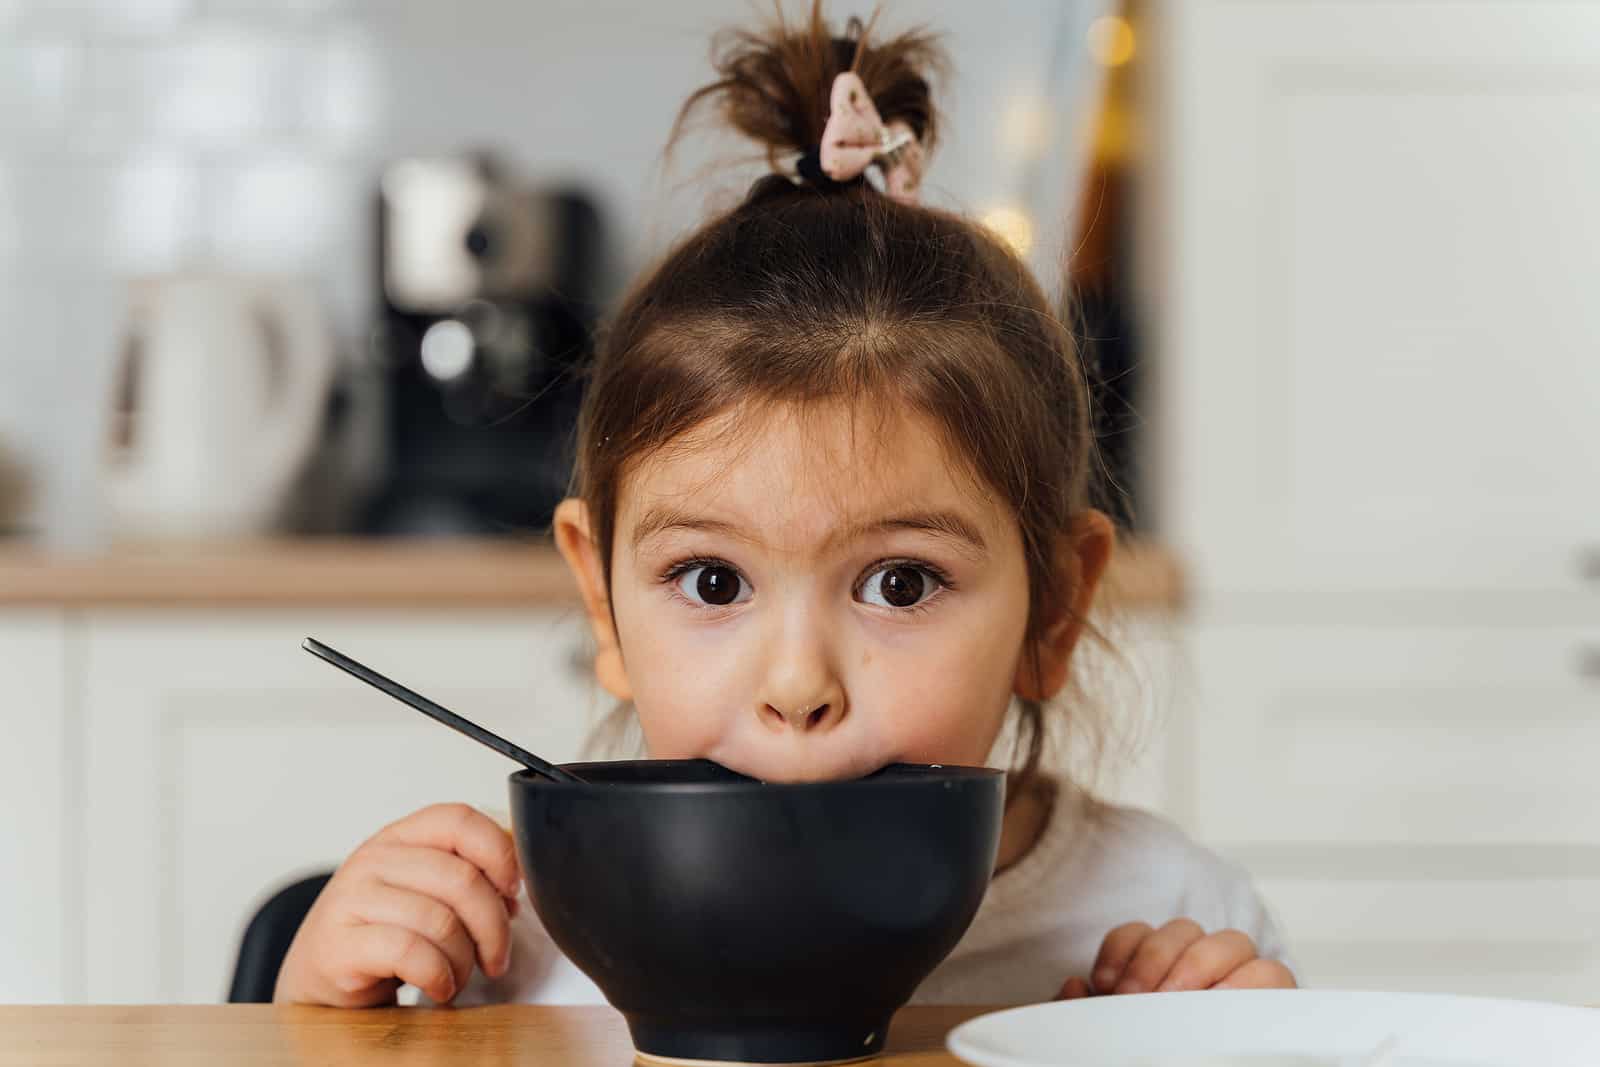 Can ABA Therapy Help Your Picky Eater?